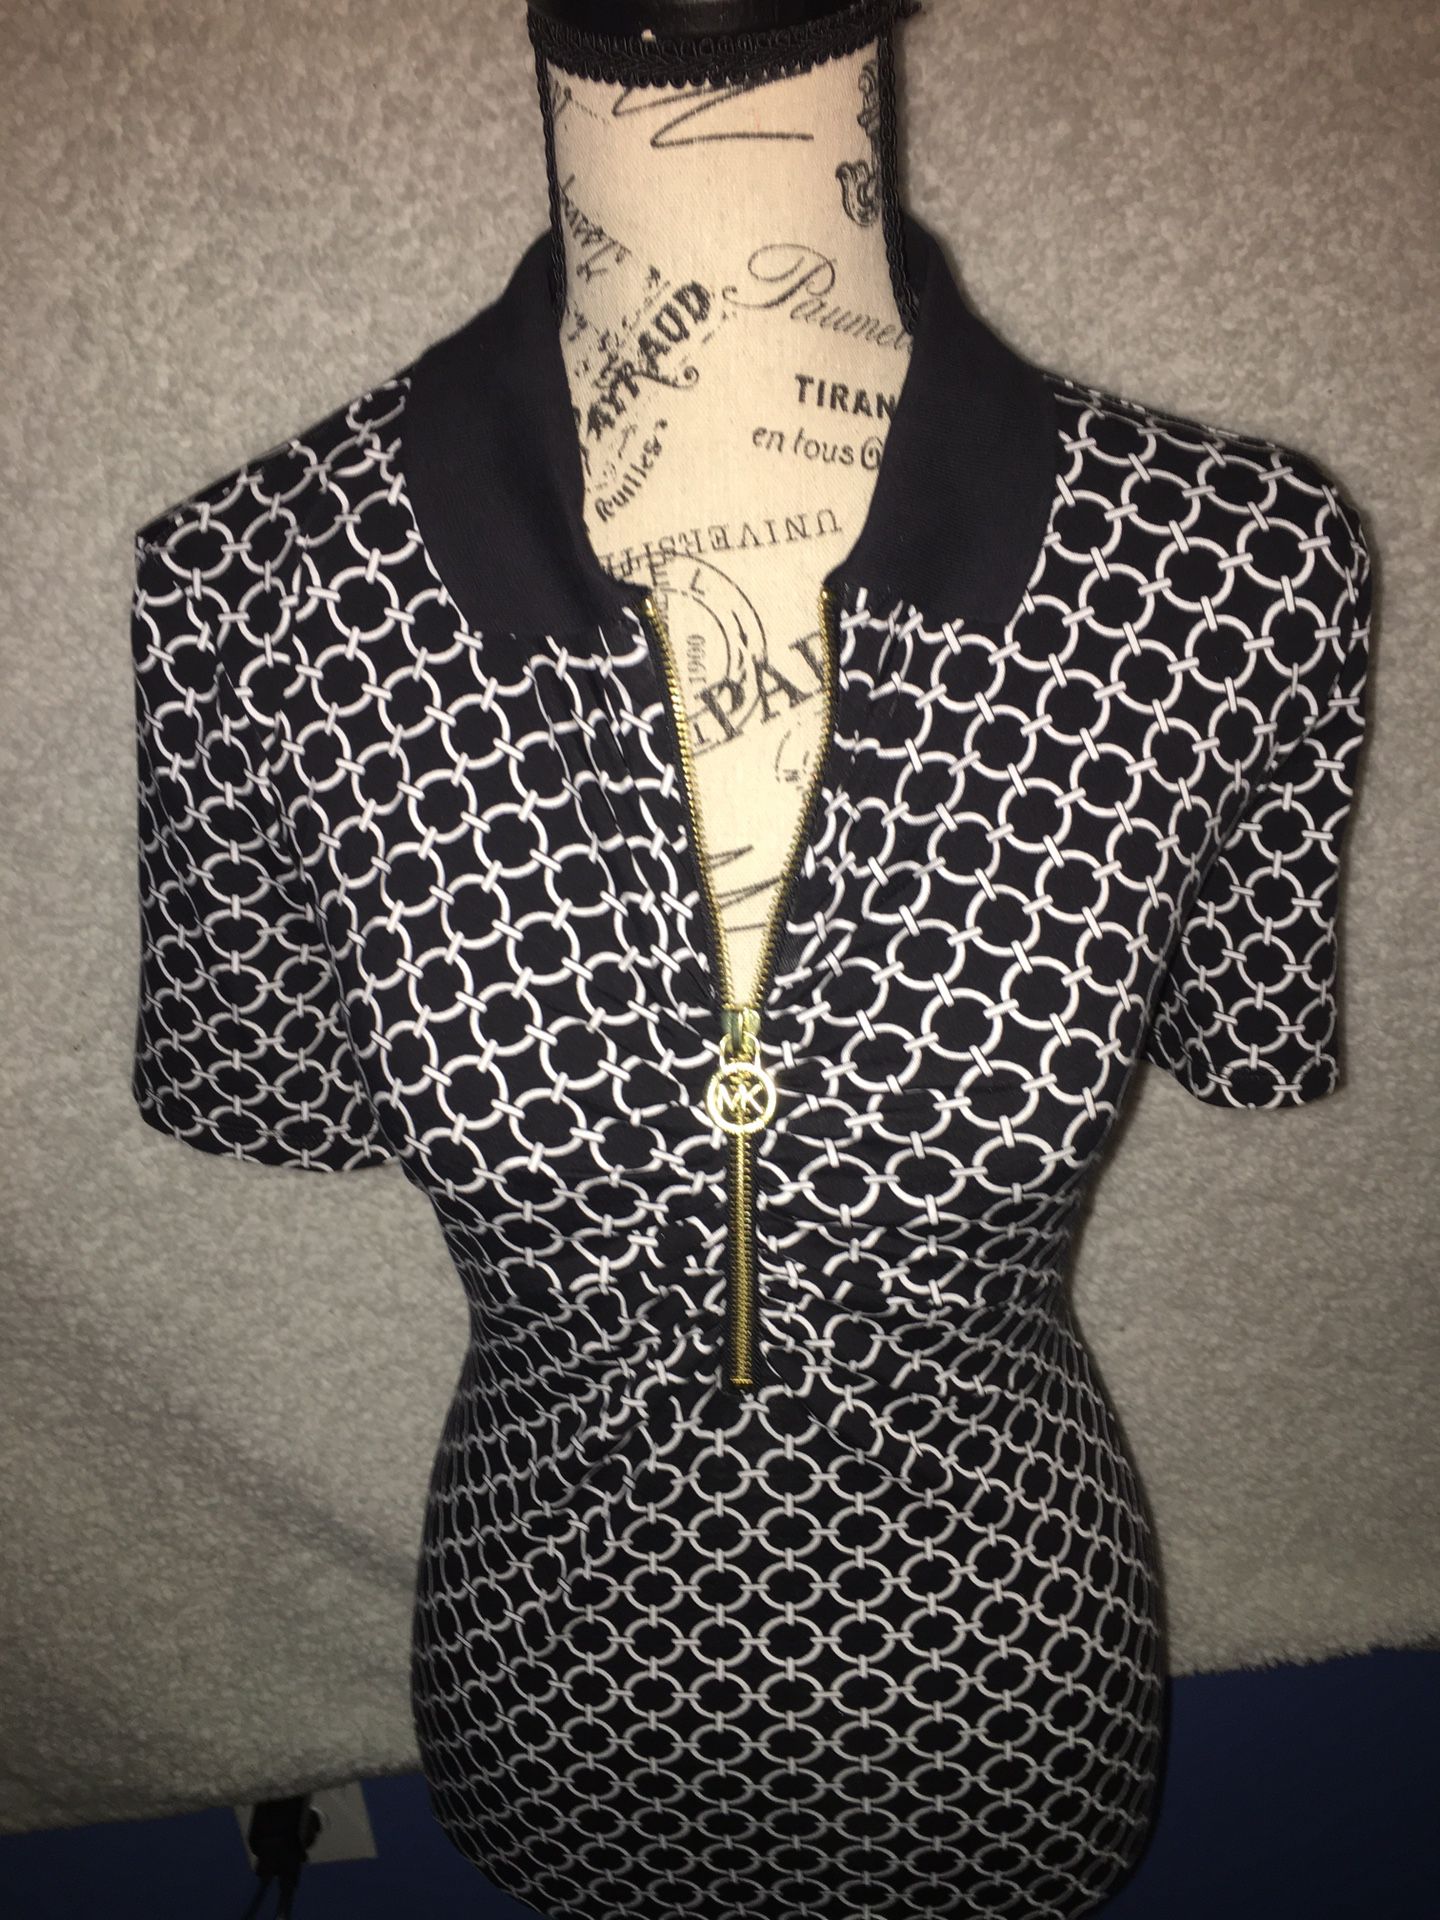 New Michel Kors Top size Large